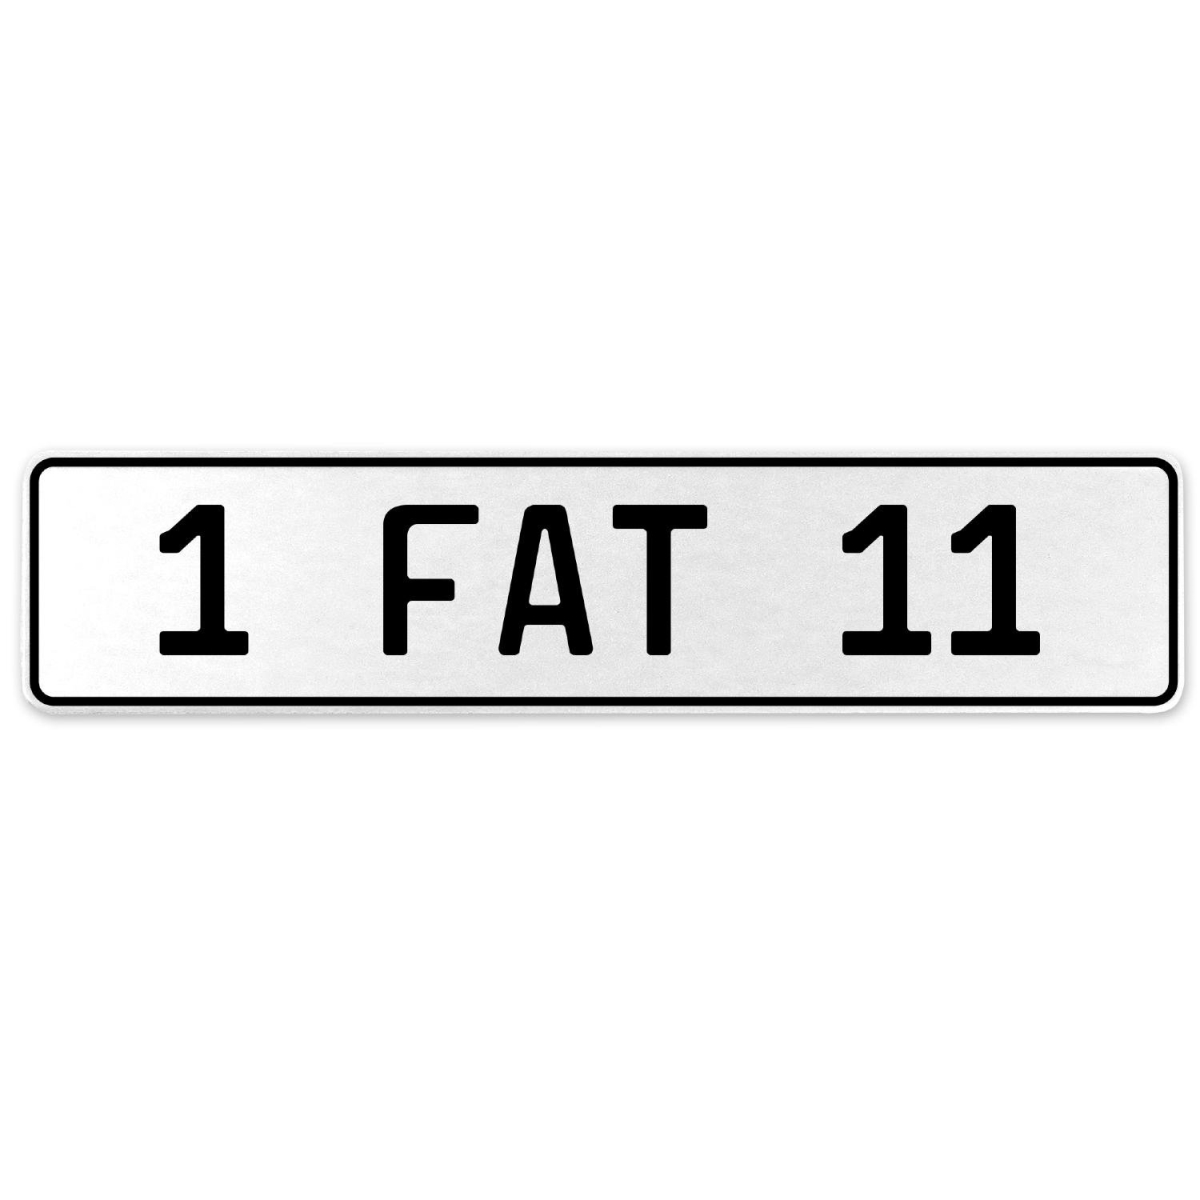 554608 1 Fat 11 - White Aluminum Street Sign Mancave Euro Plate Name Door Sign Wall